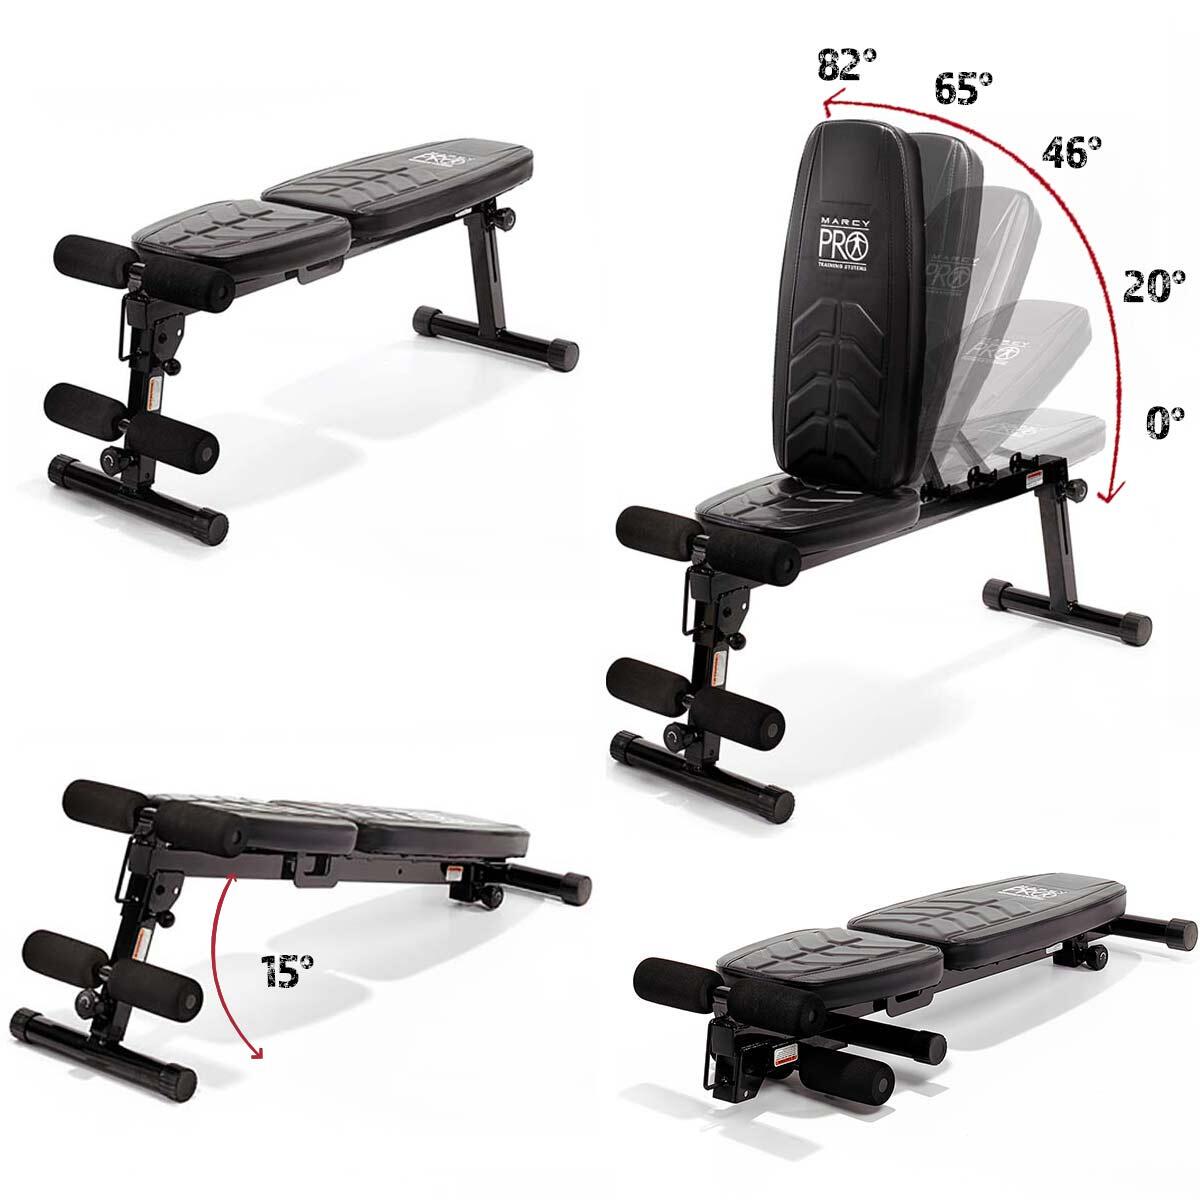 MARCY PRO PM-10110 EASY BUILD DELUXE ADJUSTABLE UTILITY WEIGHT BENCH 4/7